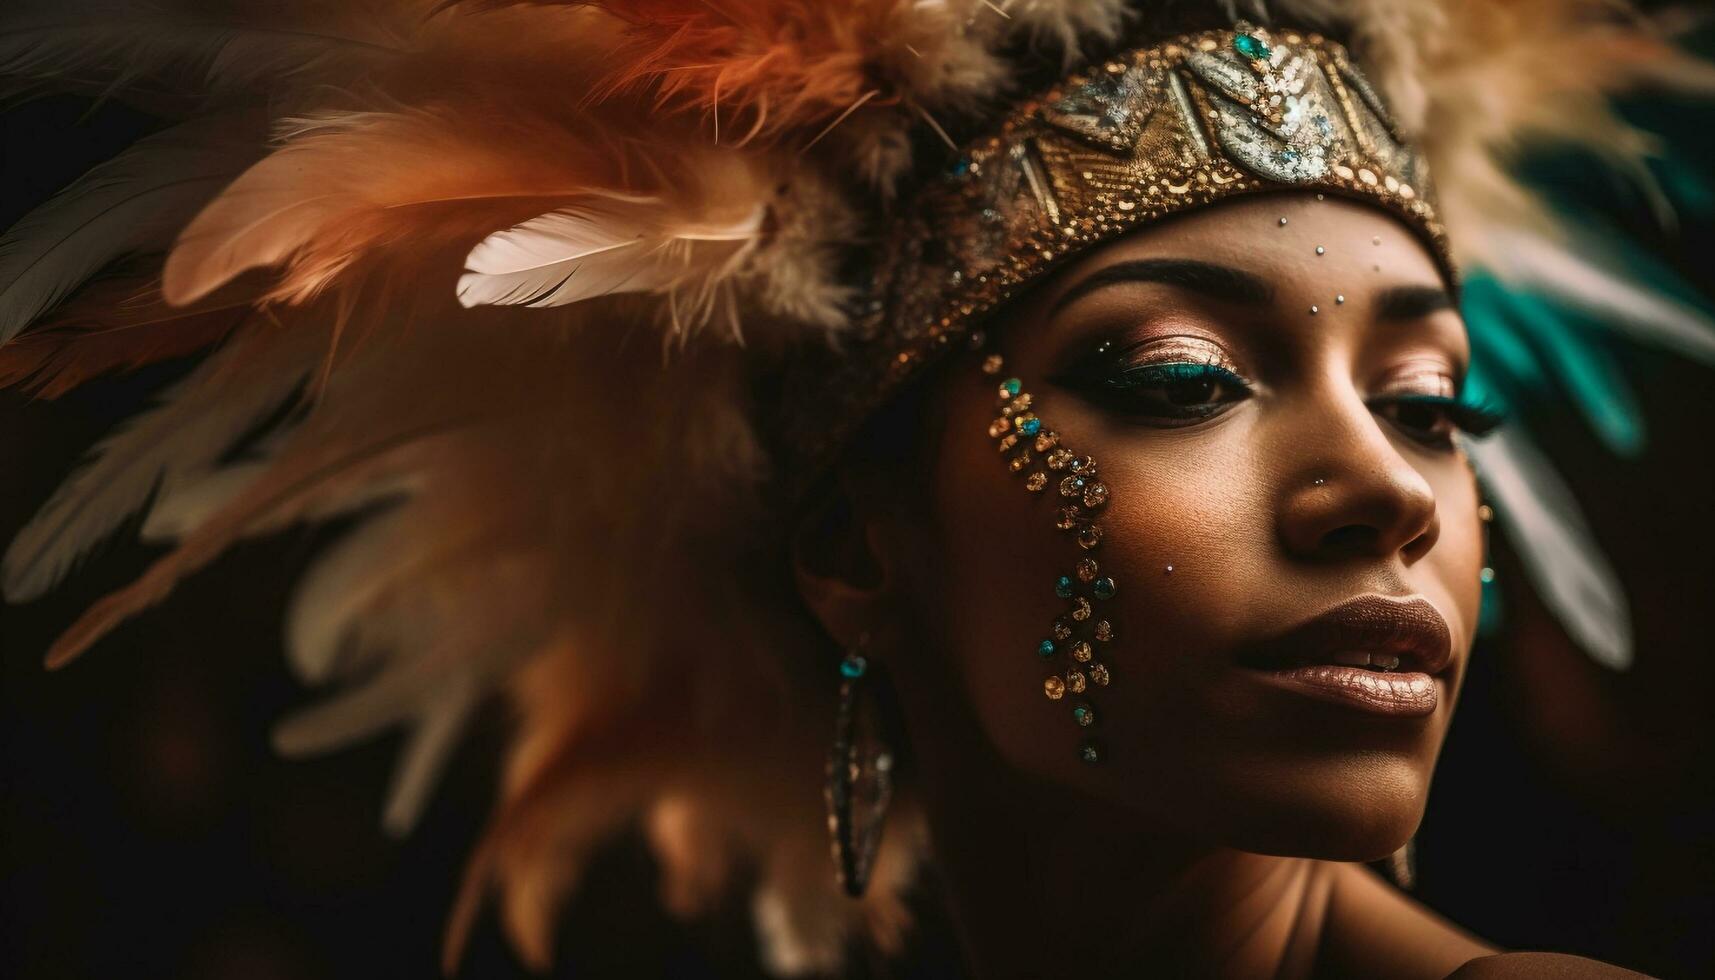 African beauty adorned with feather headdress exudes elegance and sensuality generated by AI photo